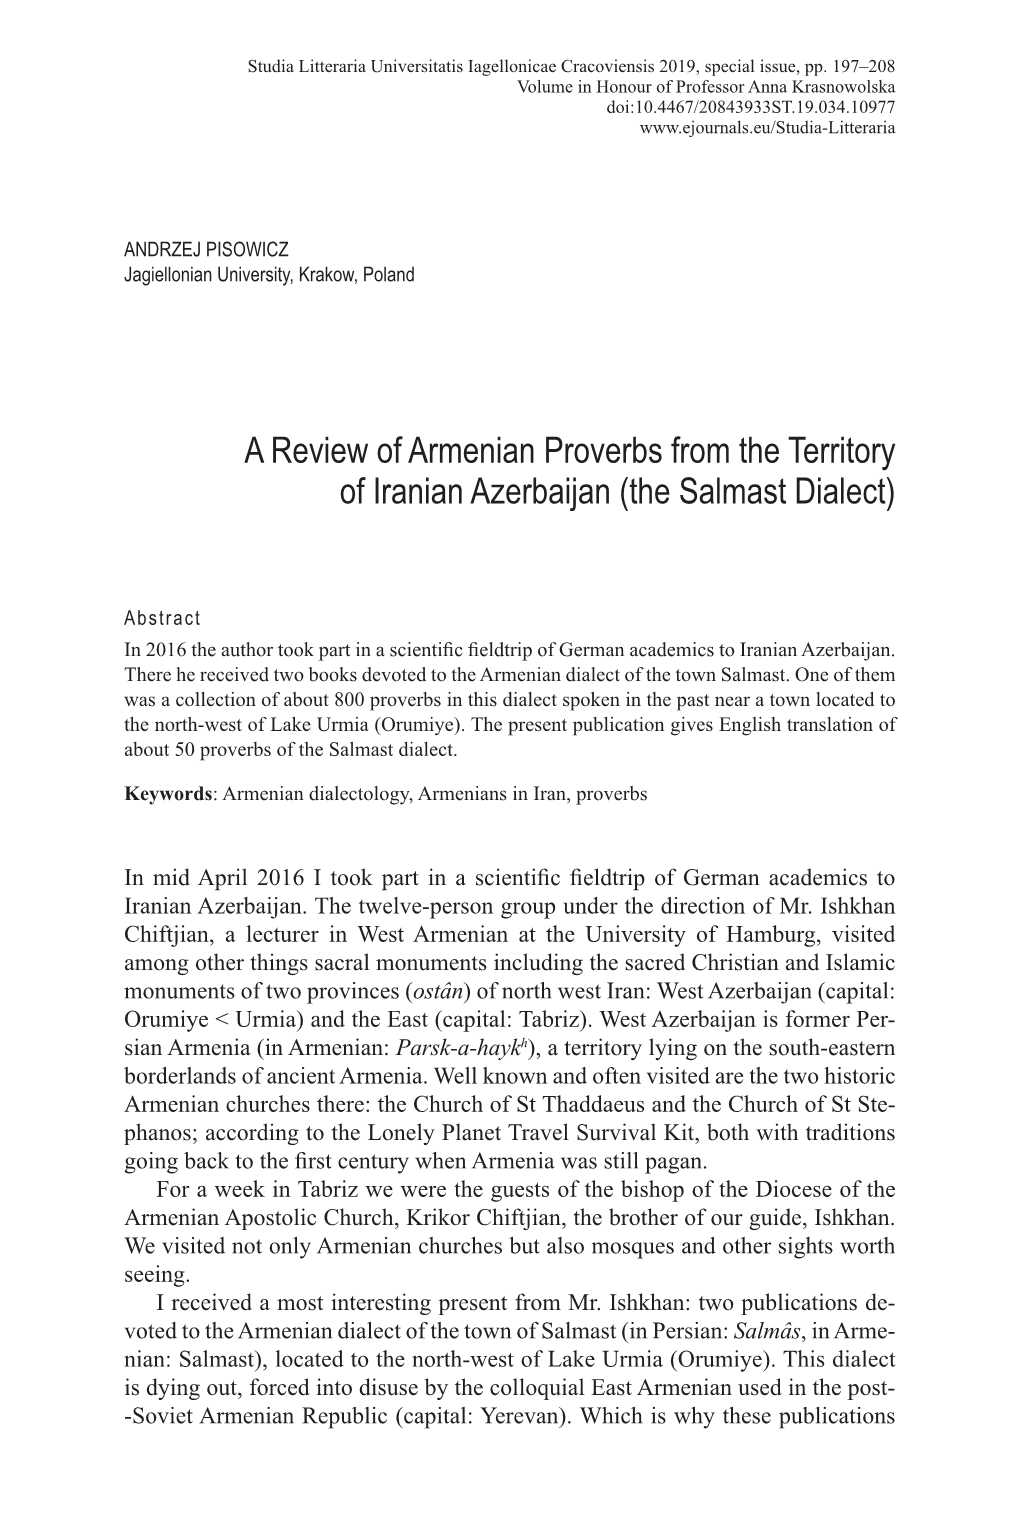 A Review of Armenian Proverbs from the Territory of Iranian Azerbaijan (The Salmast Dialect)